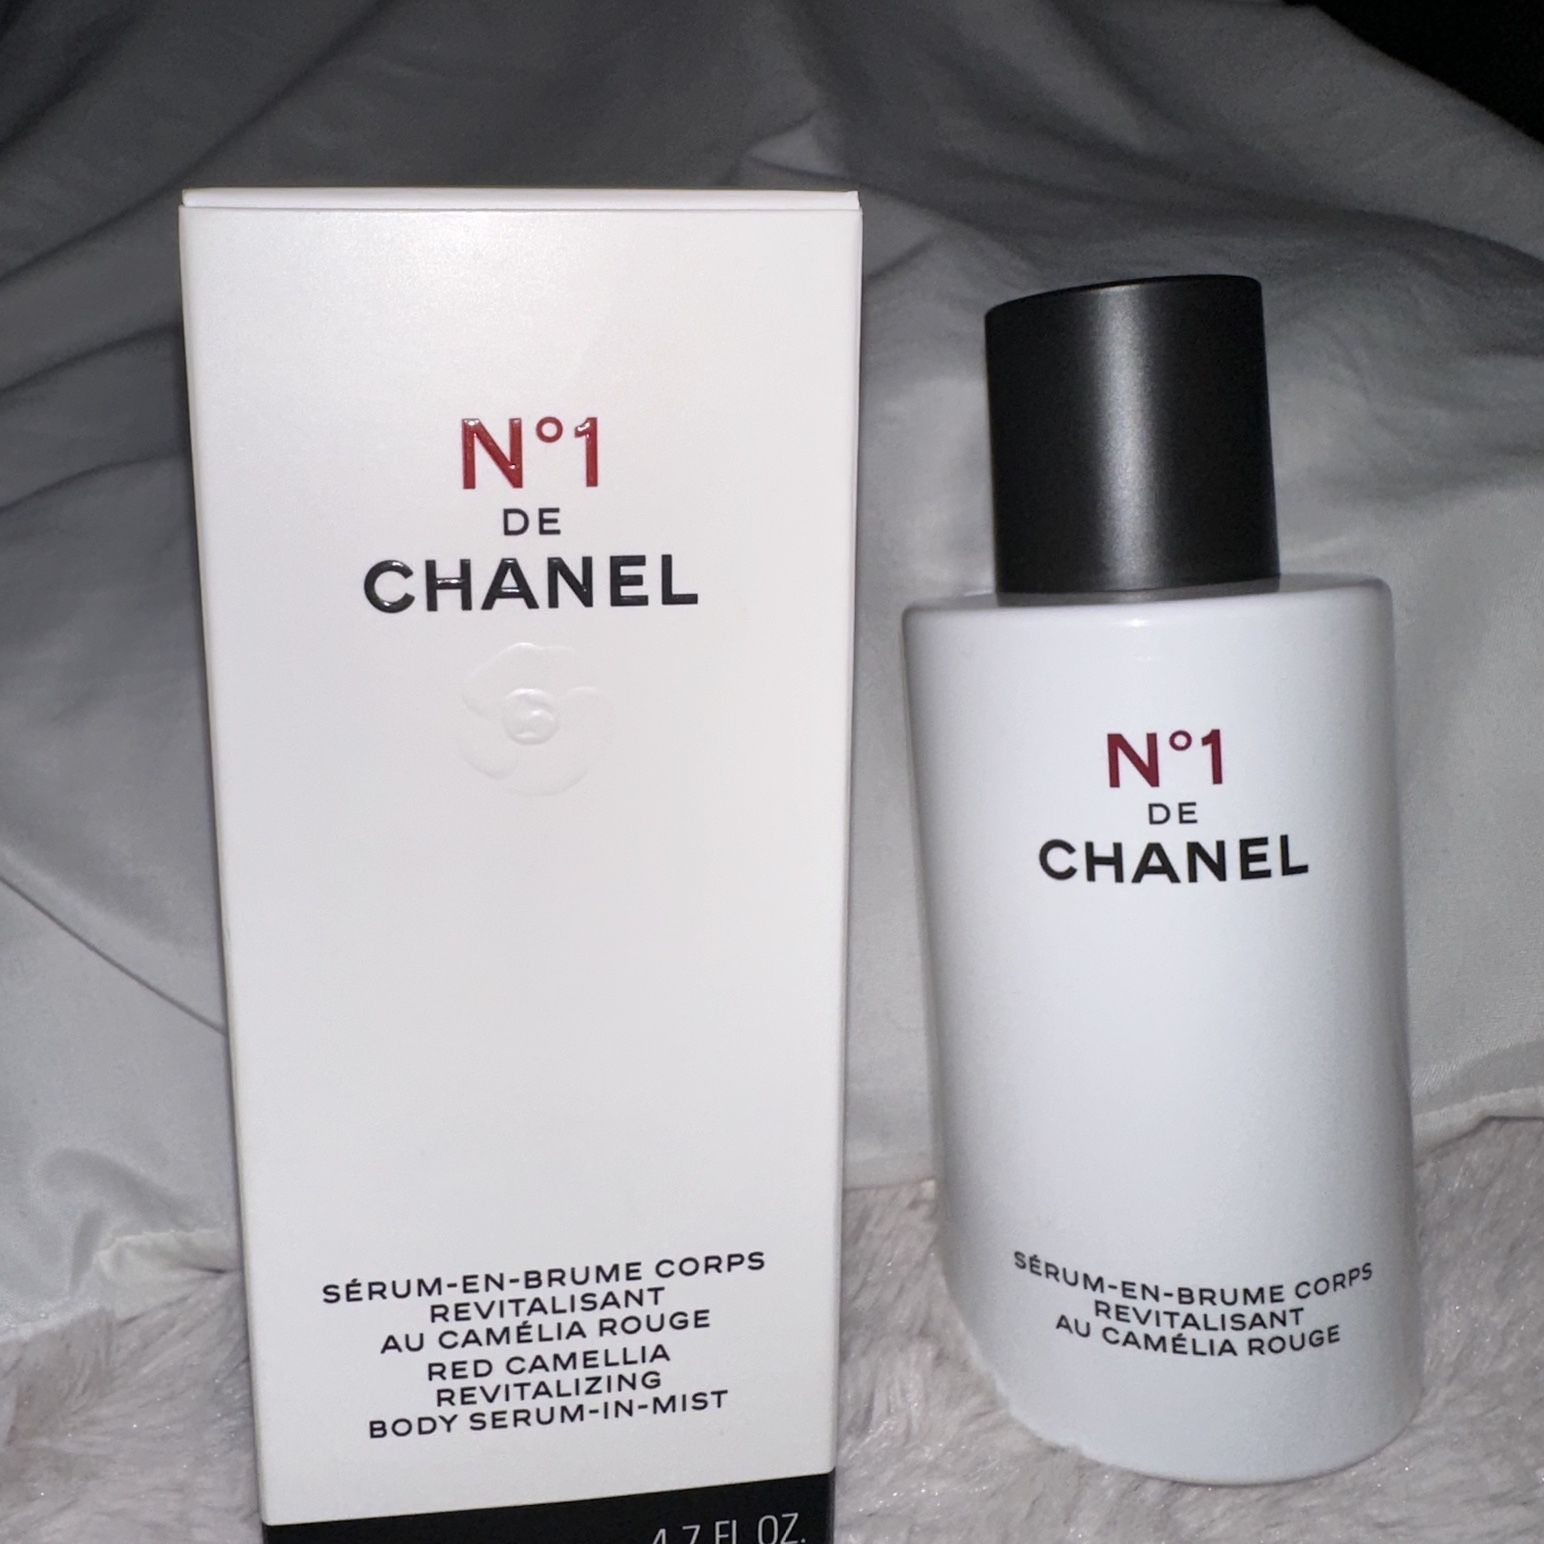 N°1 DE CHANEL REVITALIZING SERUM Serums & Concentrates, CHANEL in 2023